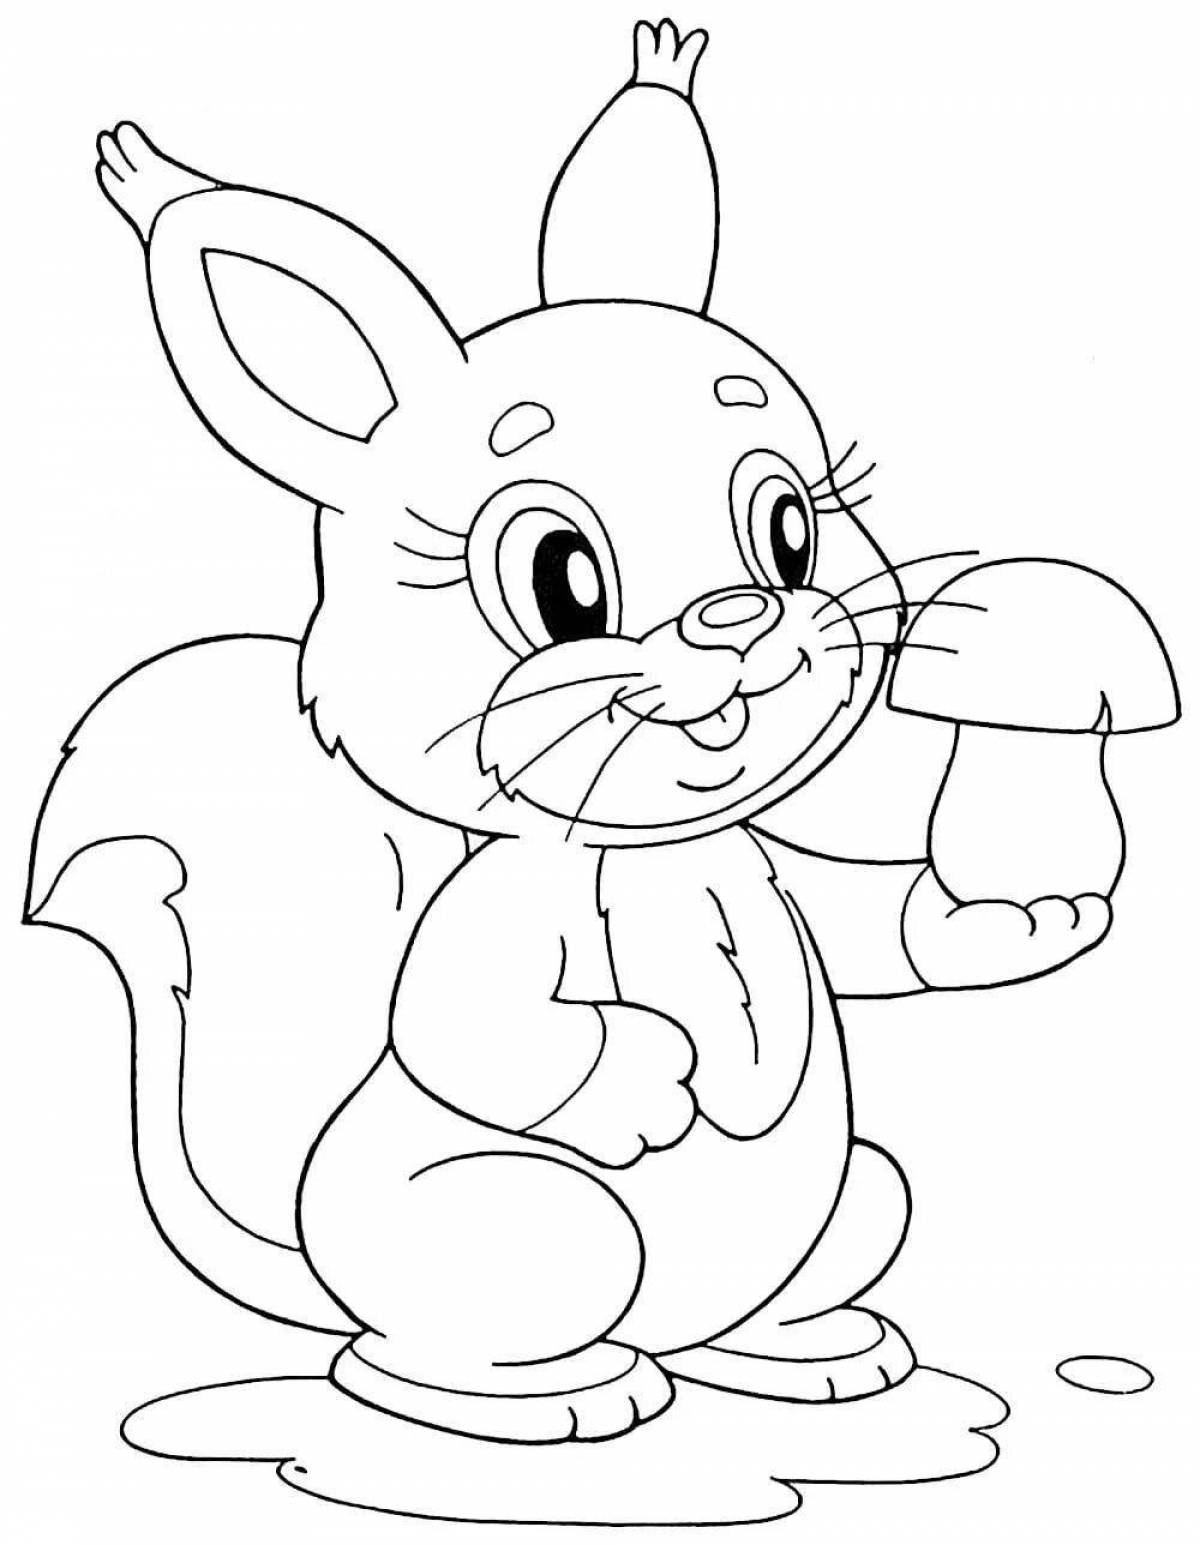 Colorful squirrel coloring book for children 6-7 years old